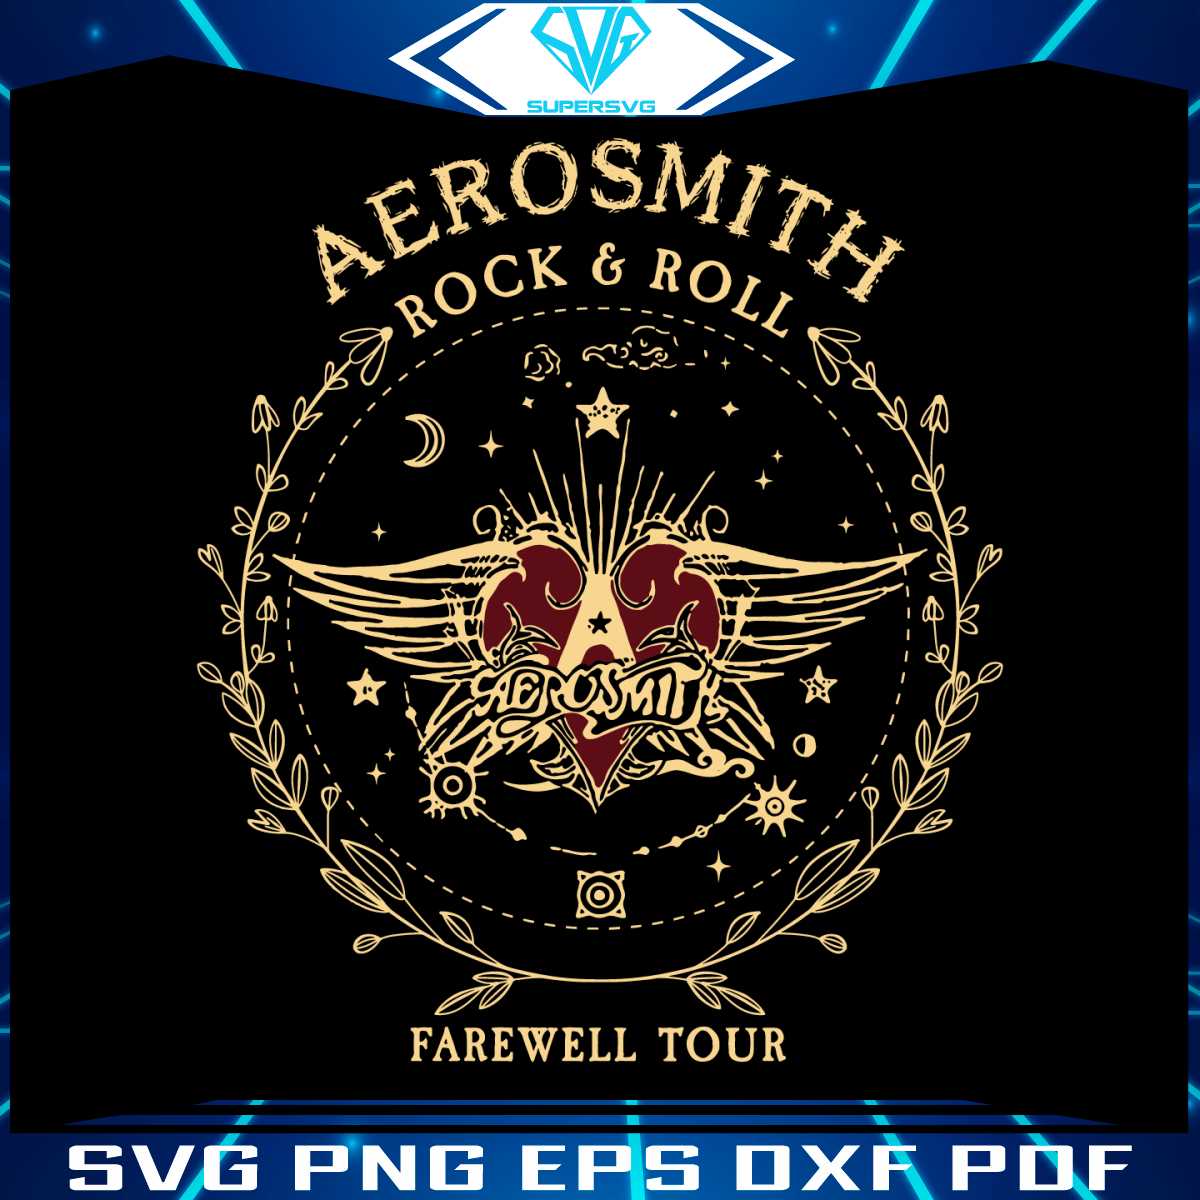 aerosmith-farewell-tour-rock-and-roll-svg-download-file